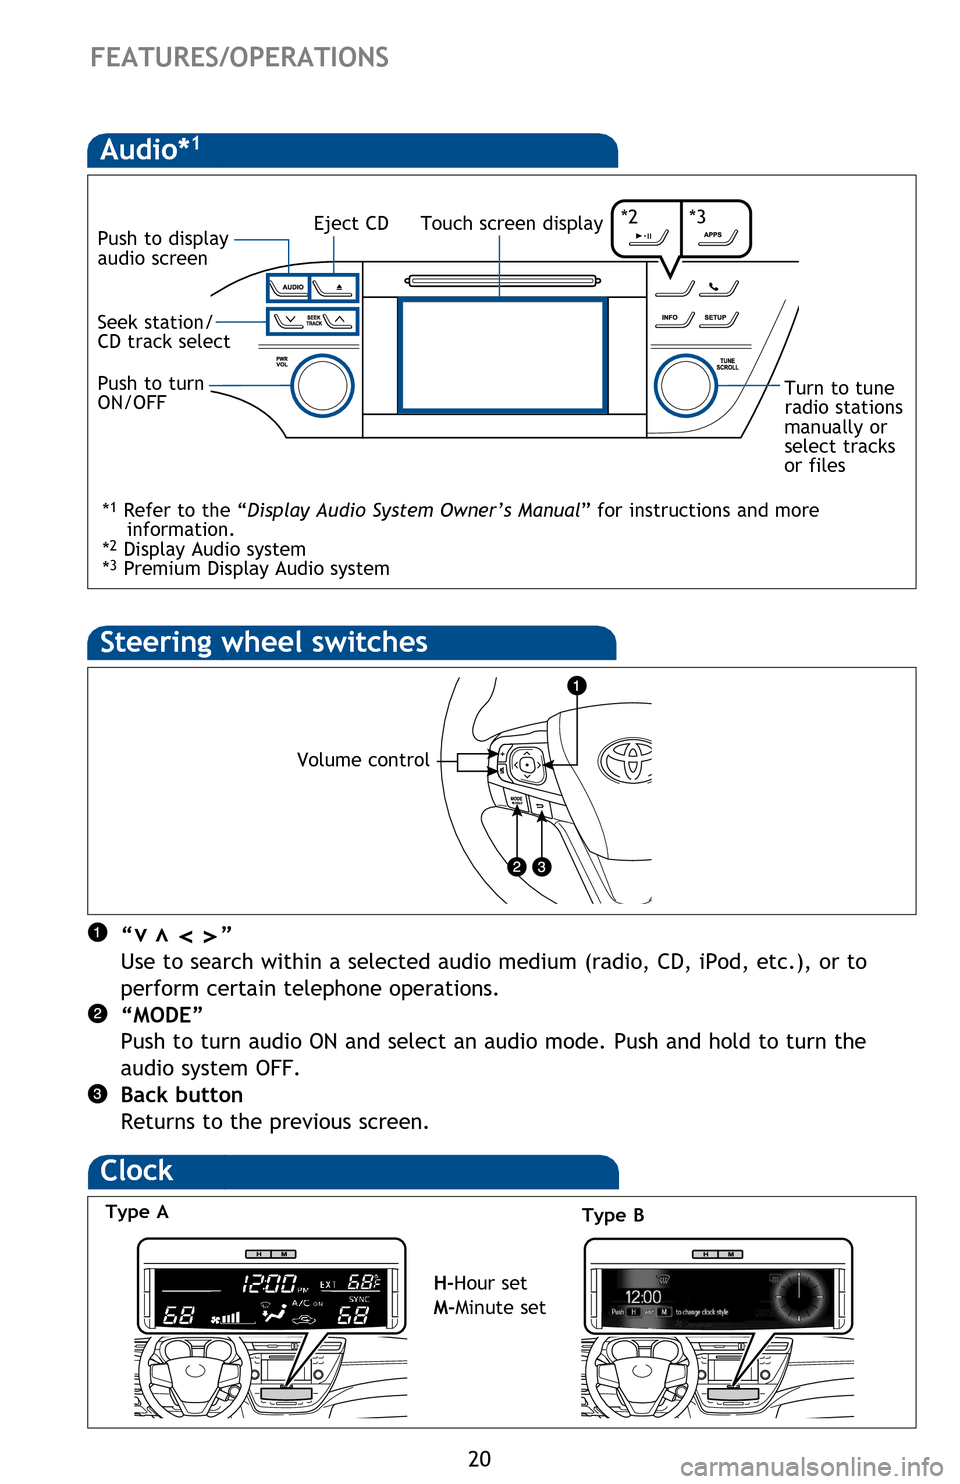 TOYOTA AVALON HYBRID 2013 XX40 / 4.G Quick Reference Guide 20
Steering wheel switches
“            ”
Use to search within a selected audio medium (radio, CD, iPod, etc.), or to 
perform certain telephone operations.
“MODE” 
Push to turn audio ON and s